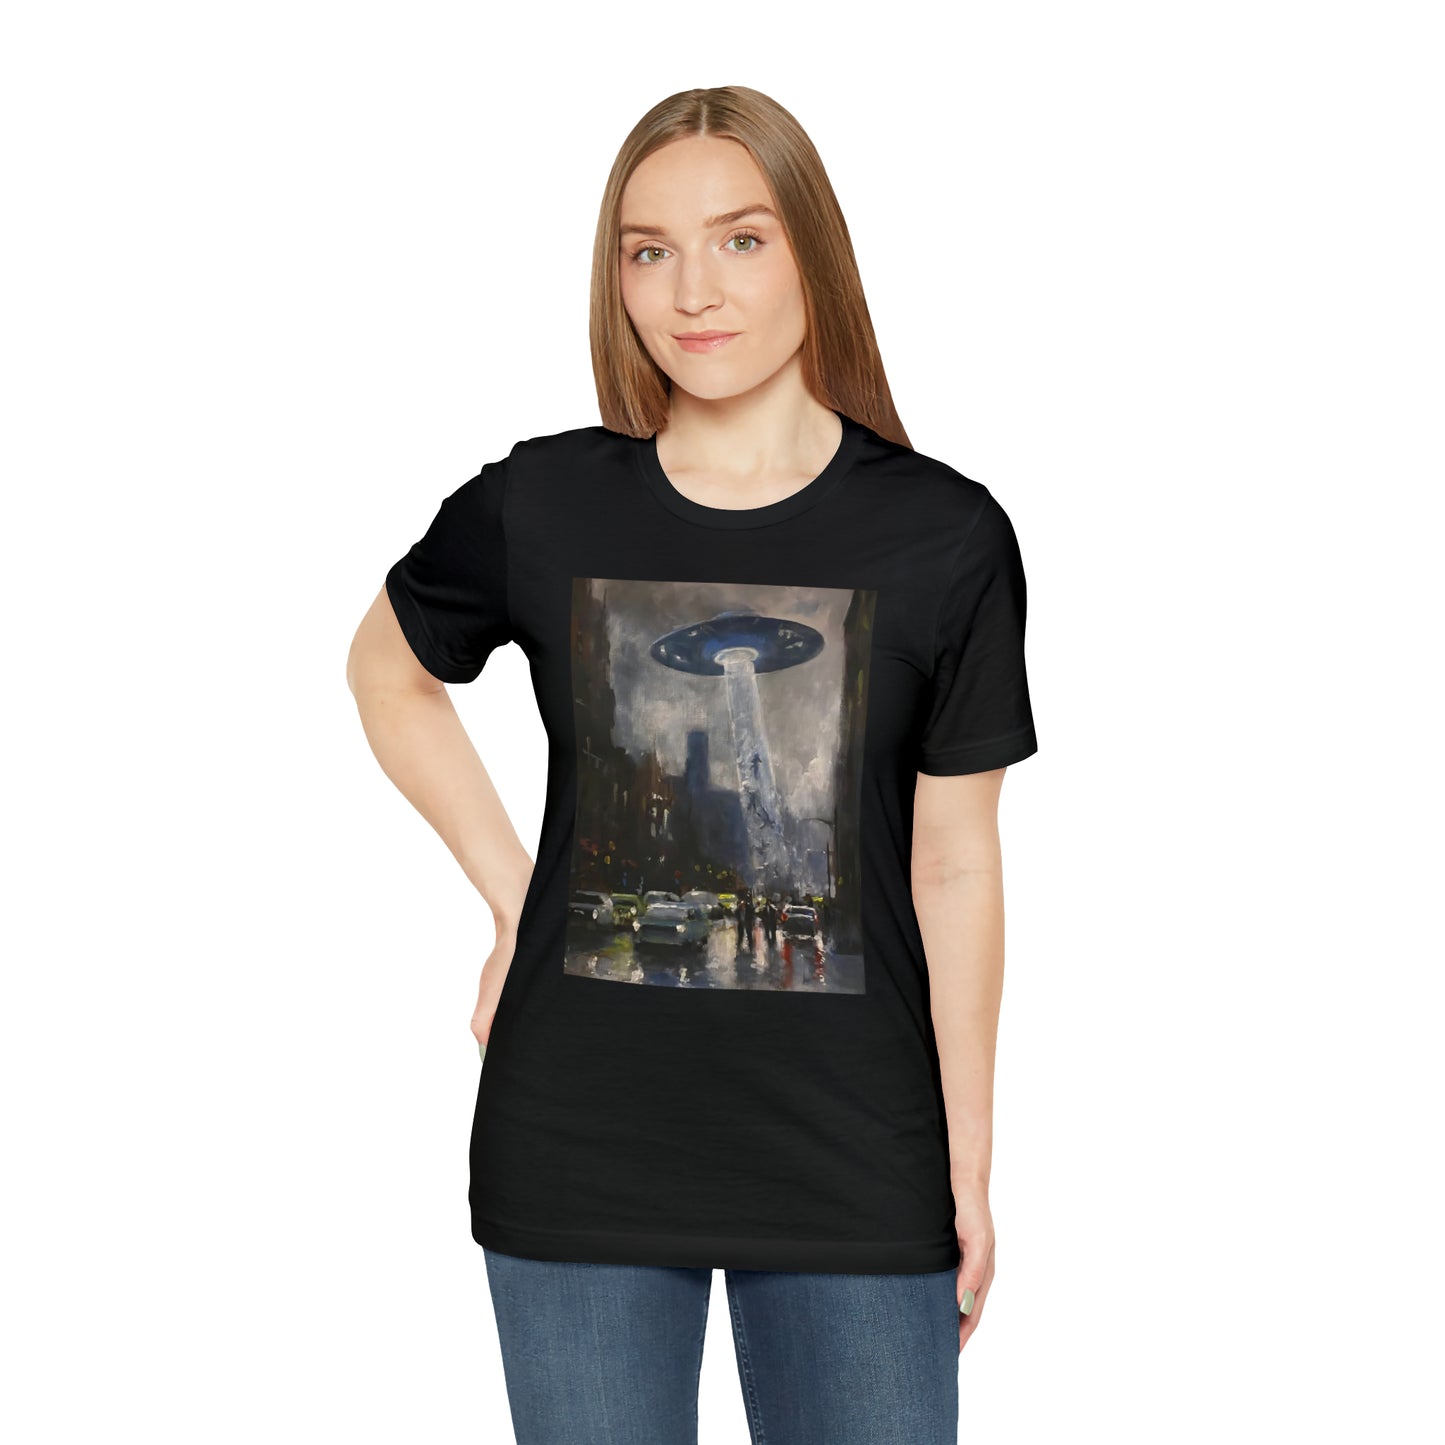 Close Encounters of the 4th Kind T-Shirt